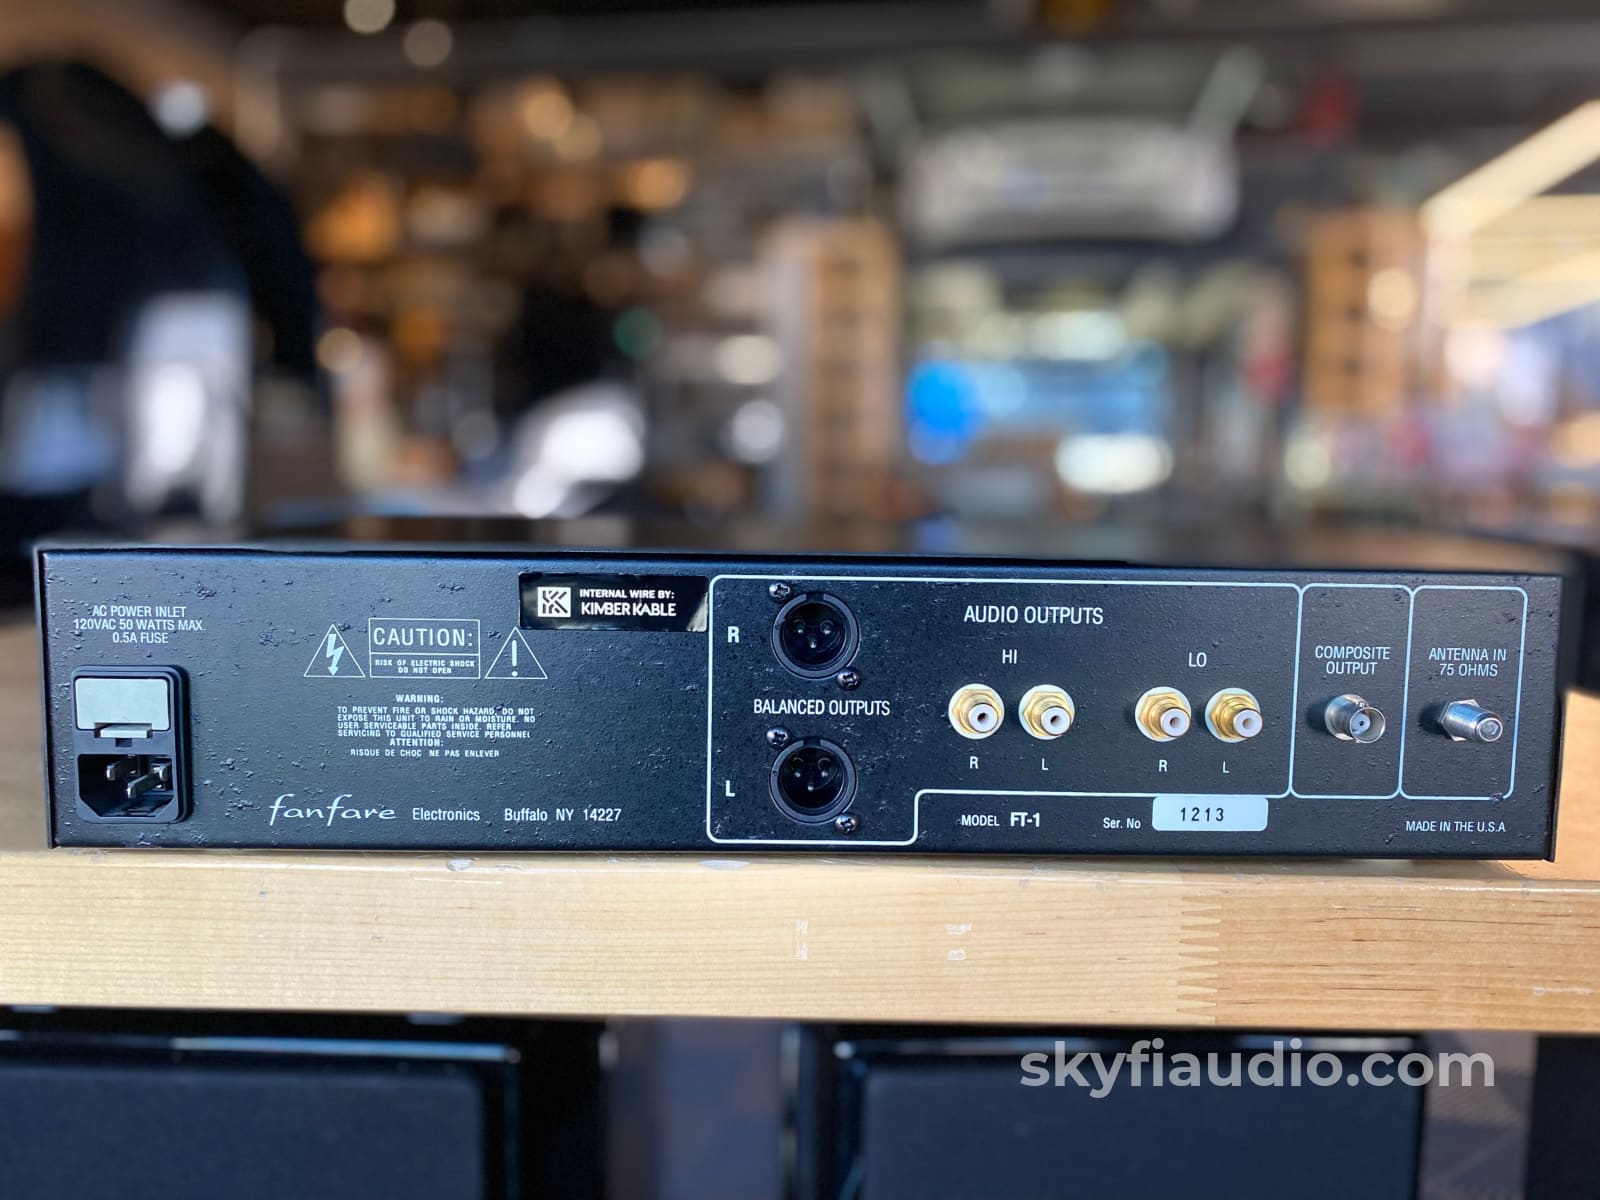 Fanfare Ft-1 Digital/Analog Fm Tuner W/ Balanced Output Internal Kimber Kable Stereophile Class A